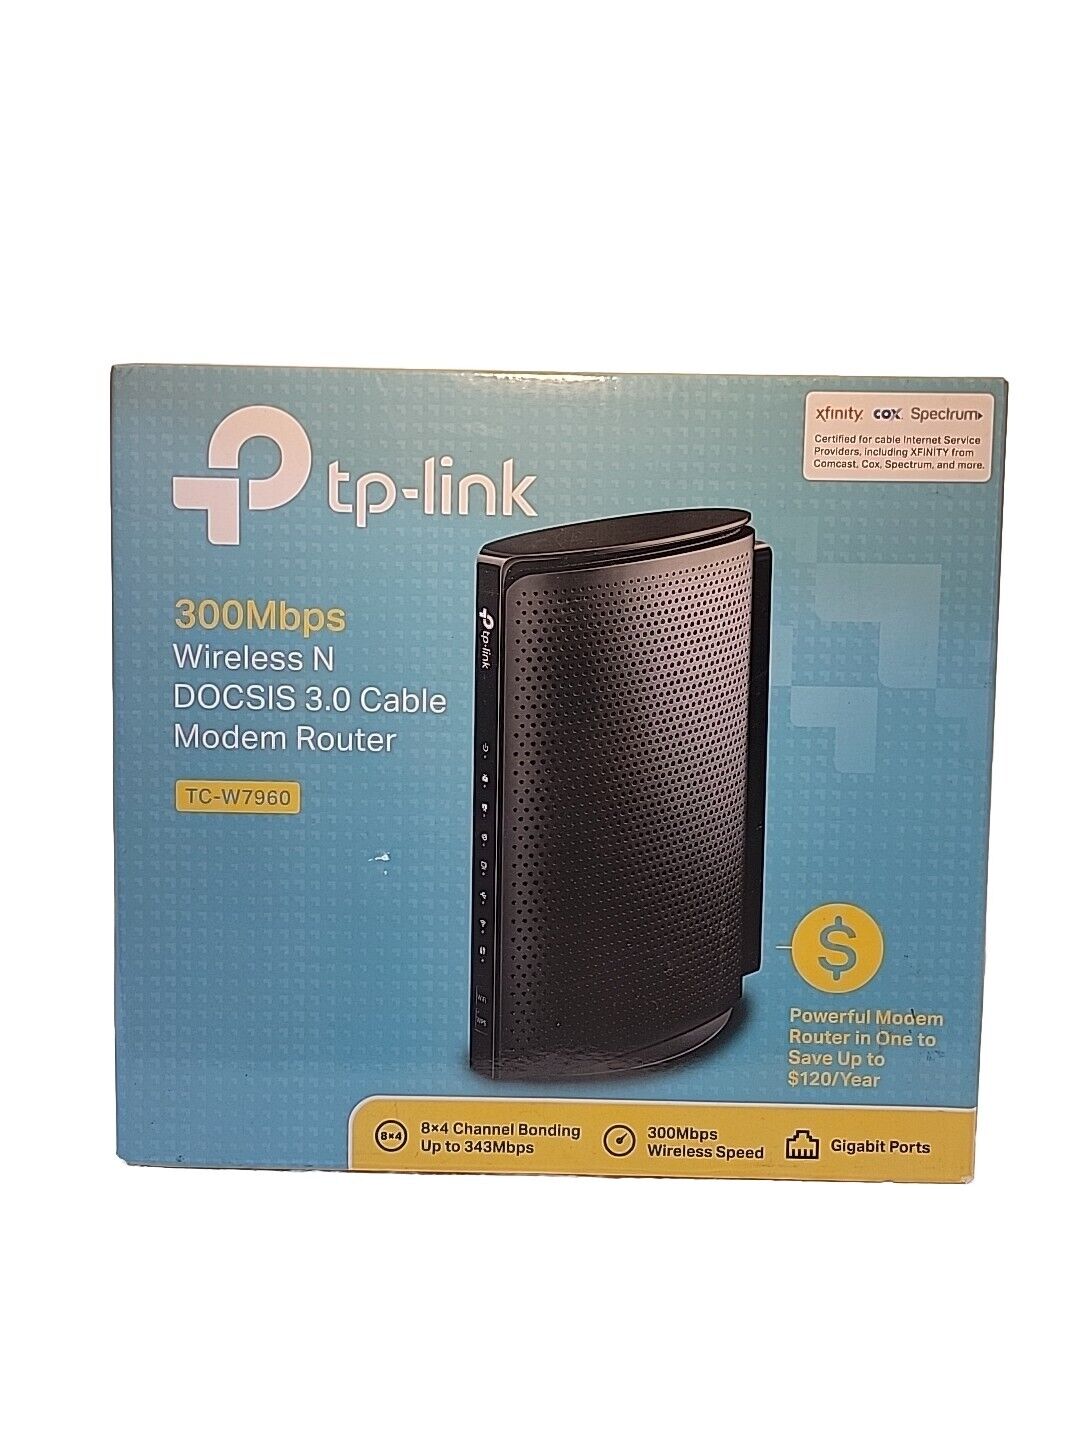 TP-Link TC-W7960 300Mbps Wireless Modem Router Comcast XFINITY Time Warner Cable